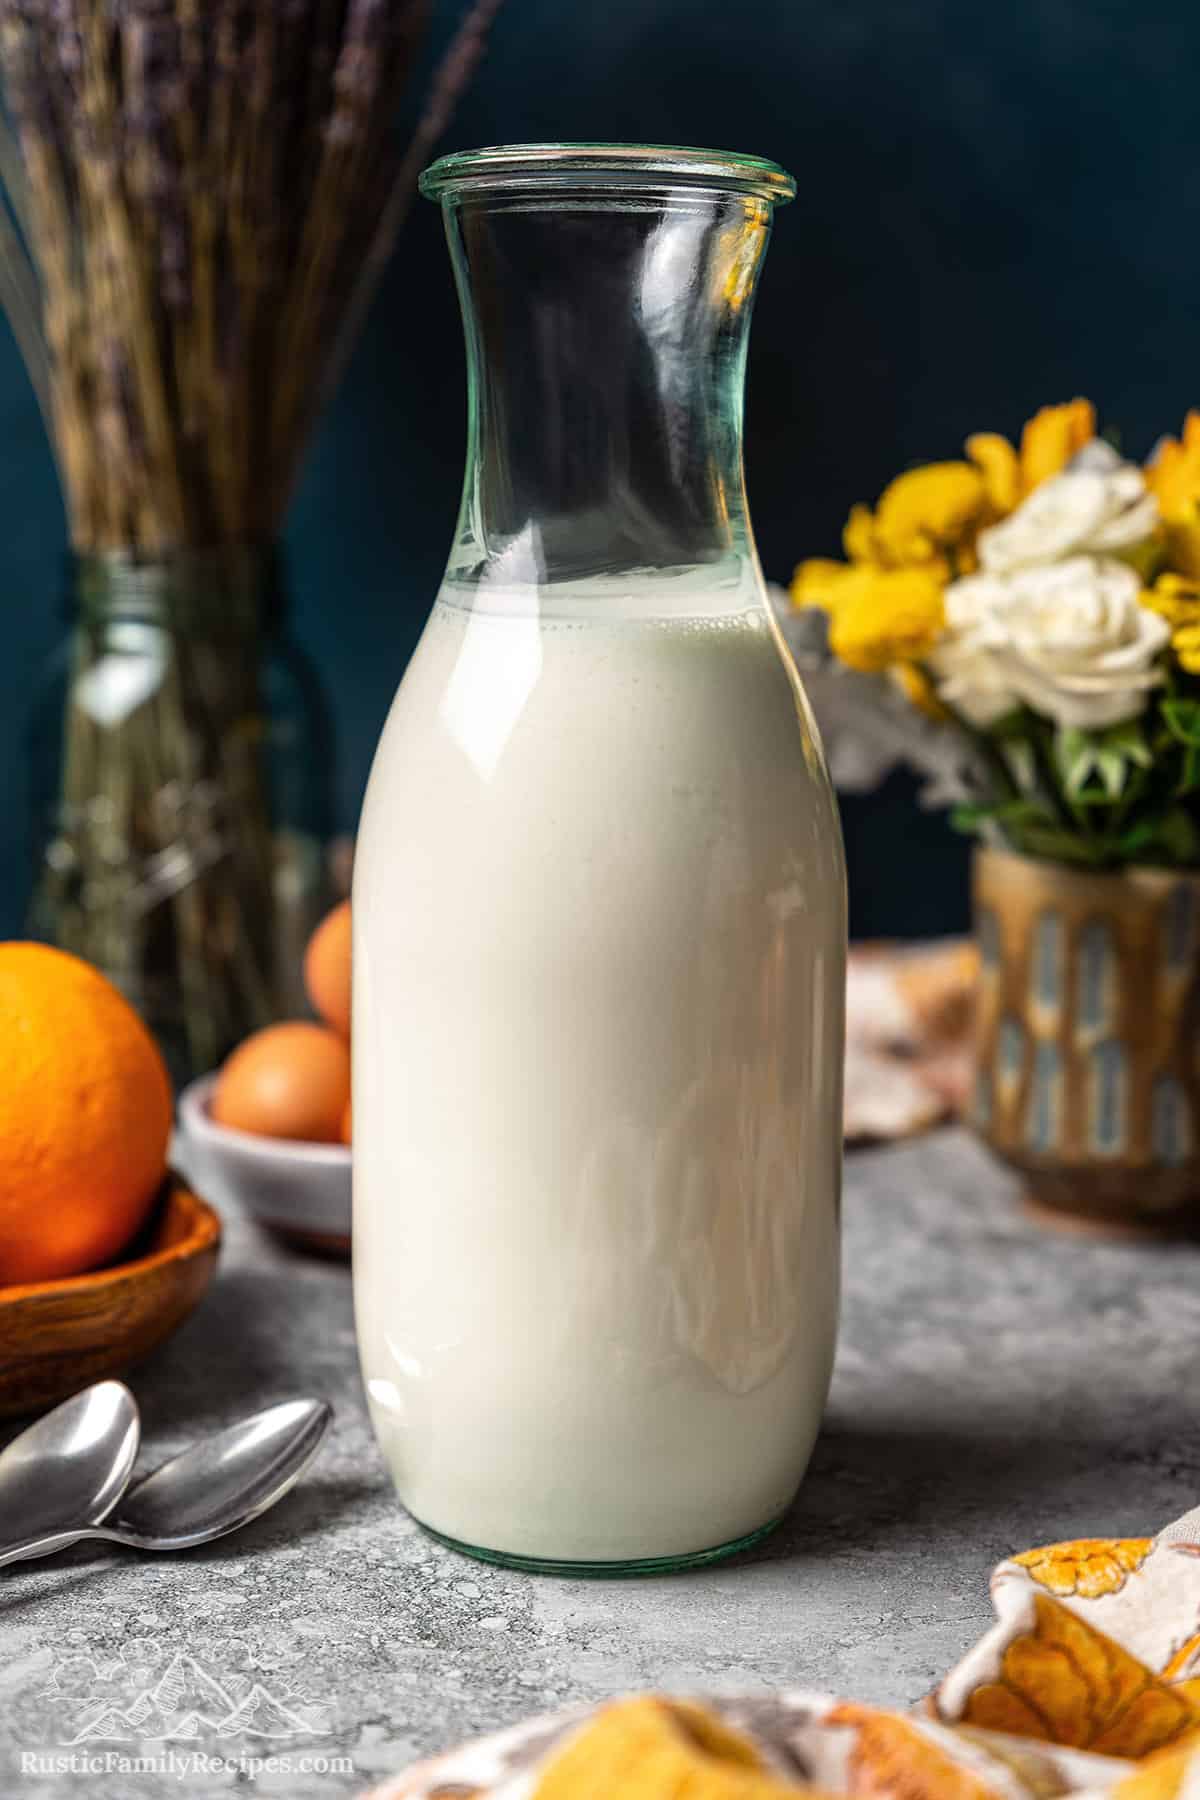 Jar filled with buttermilk